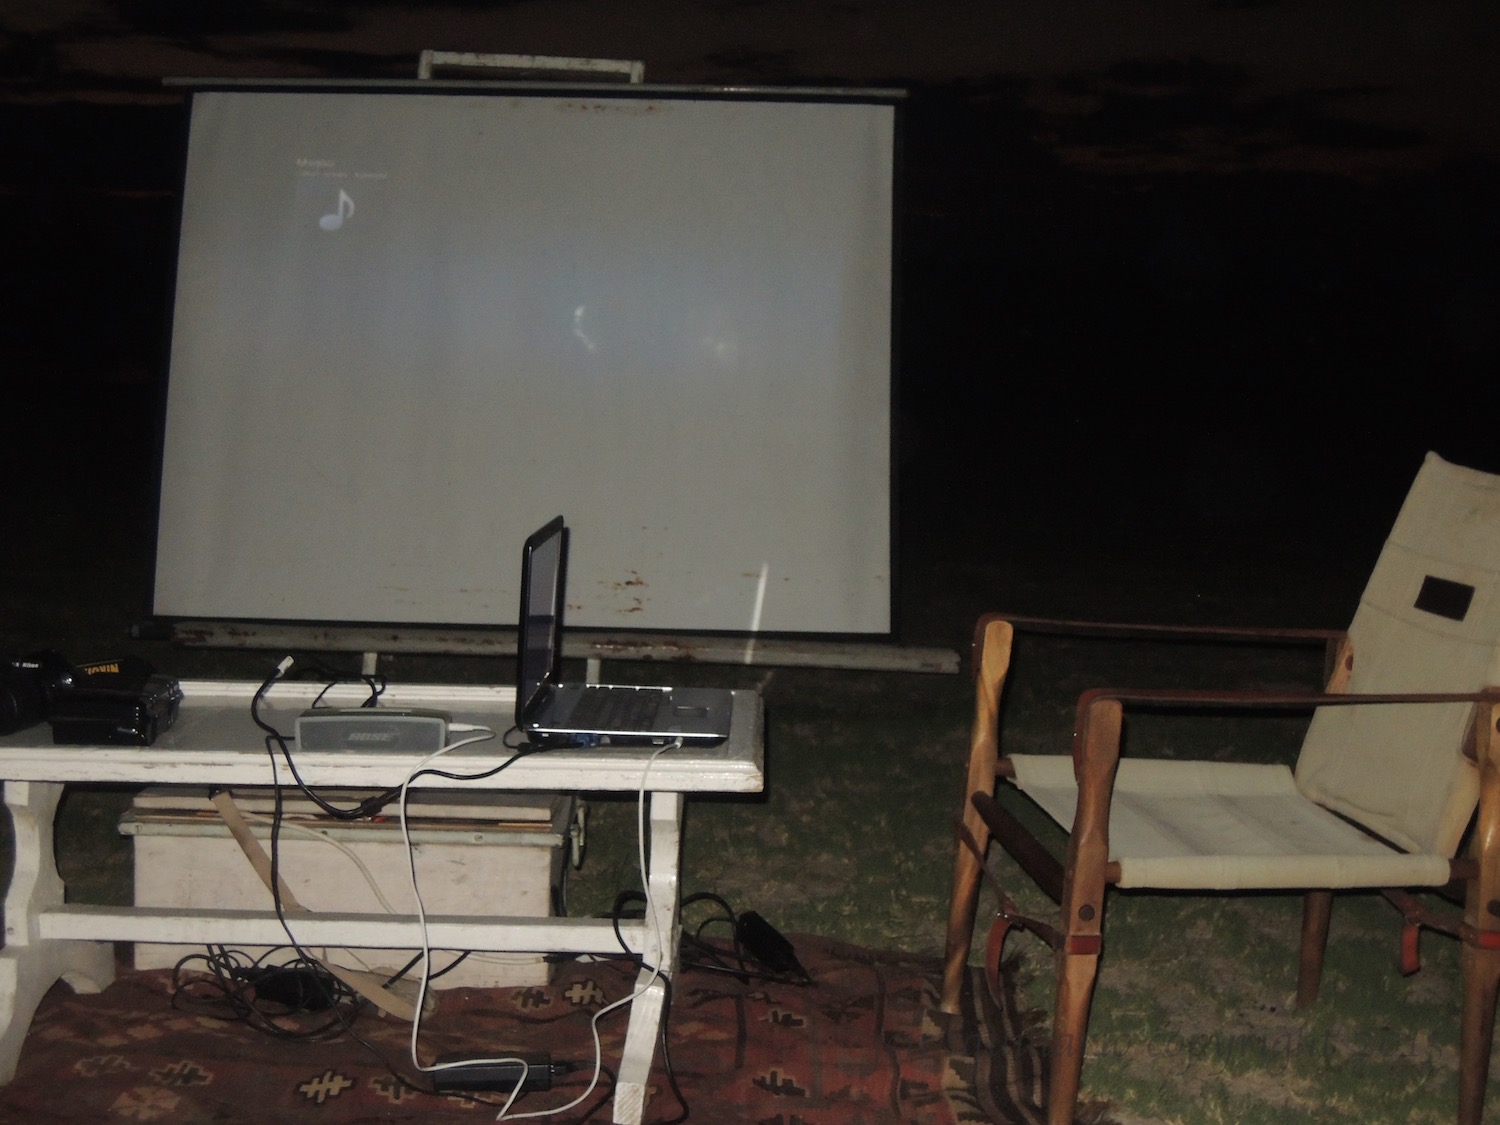  Our screen at the "Bush Cinema" 